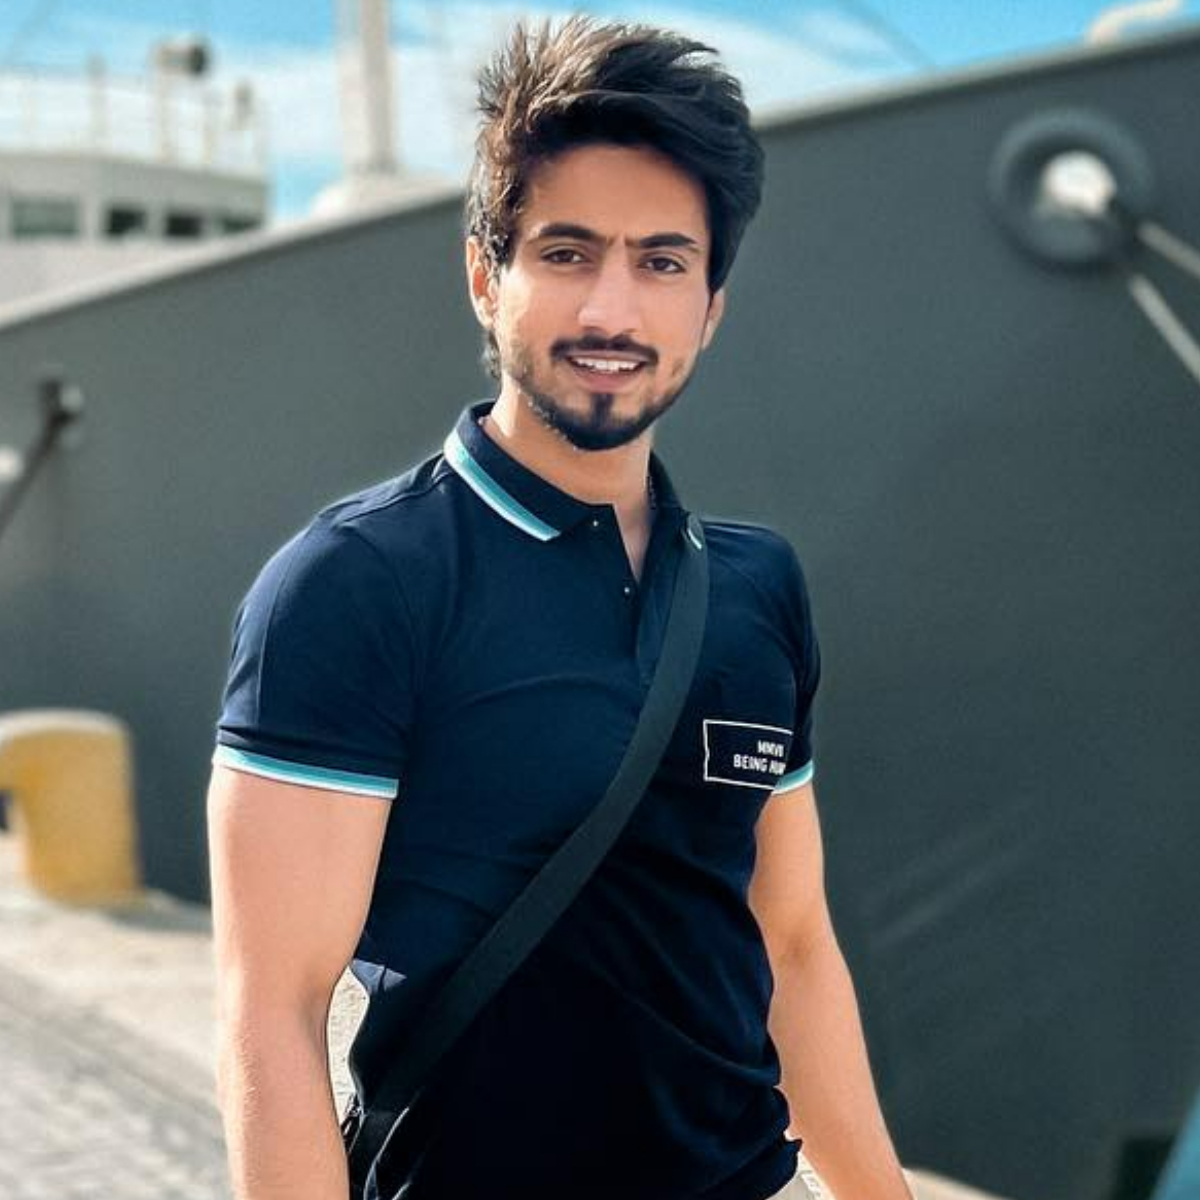 Jhalak Dikhhla Jaa 10's Faisal Shaikh: Dancing in front of LIVE audience will be a new experience; EXCLUSIVE